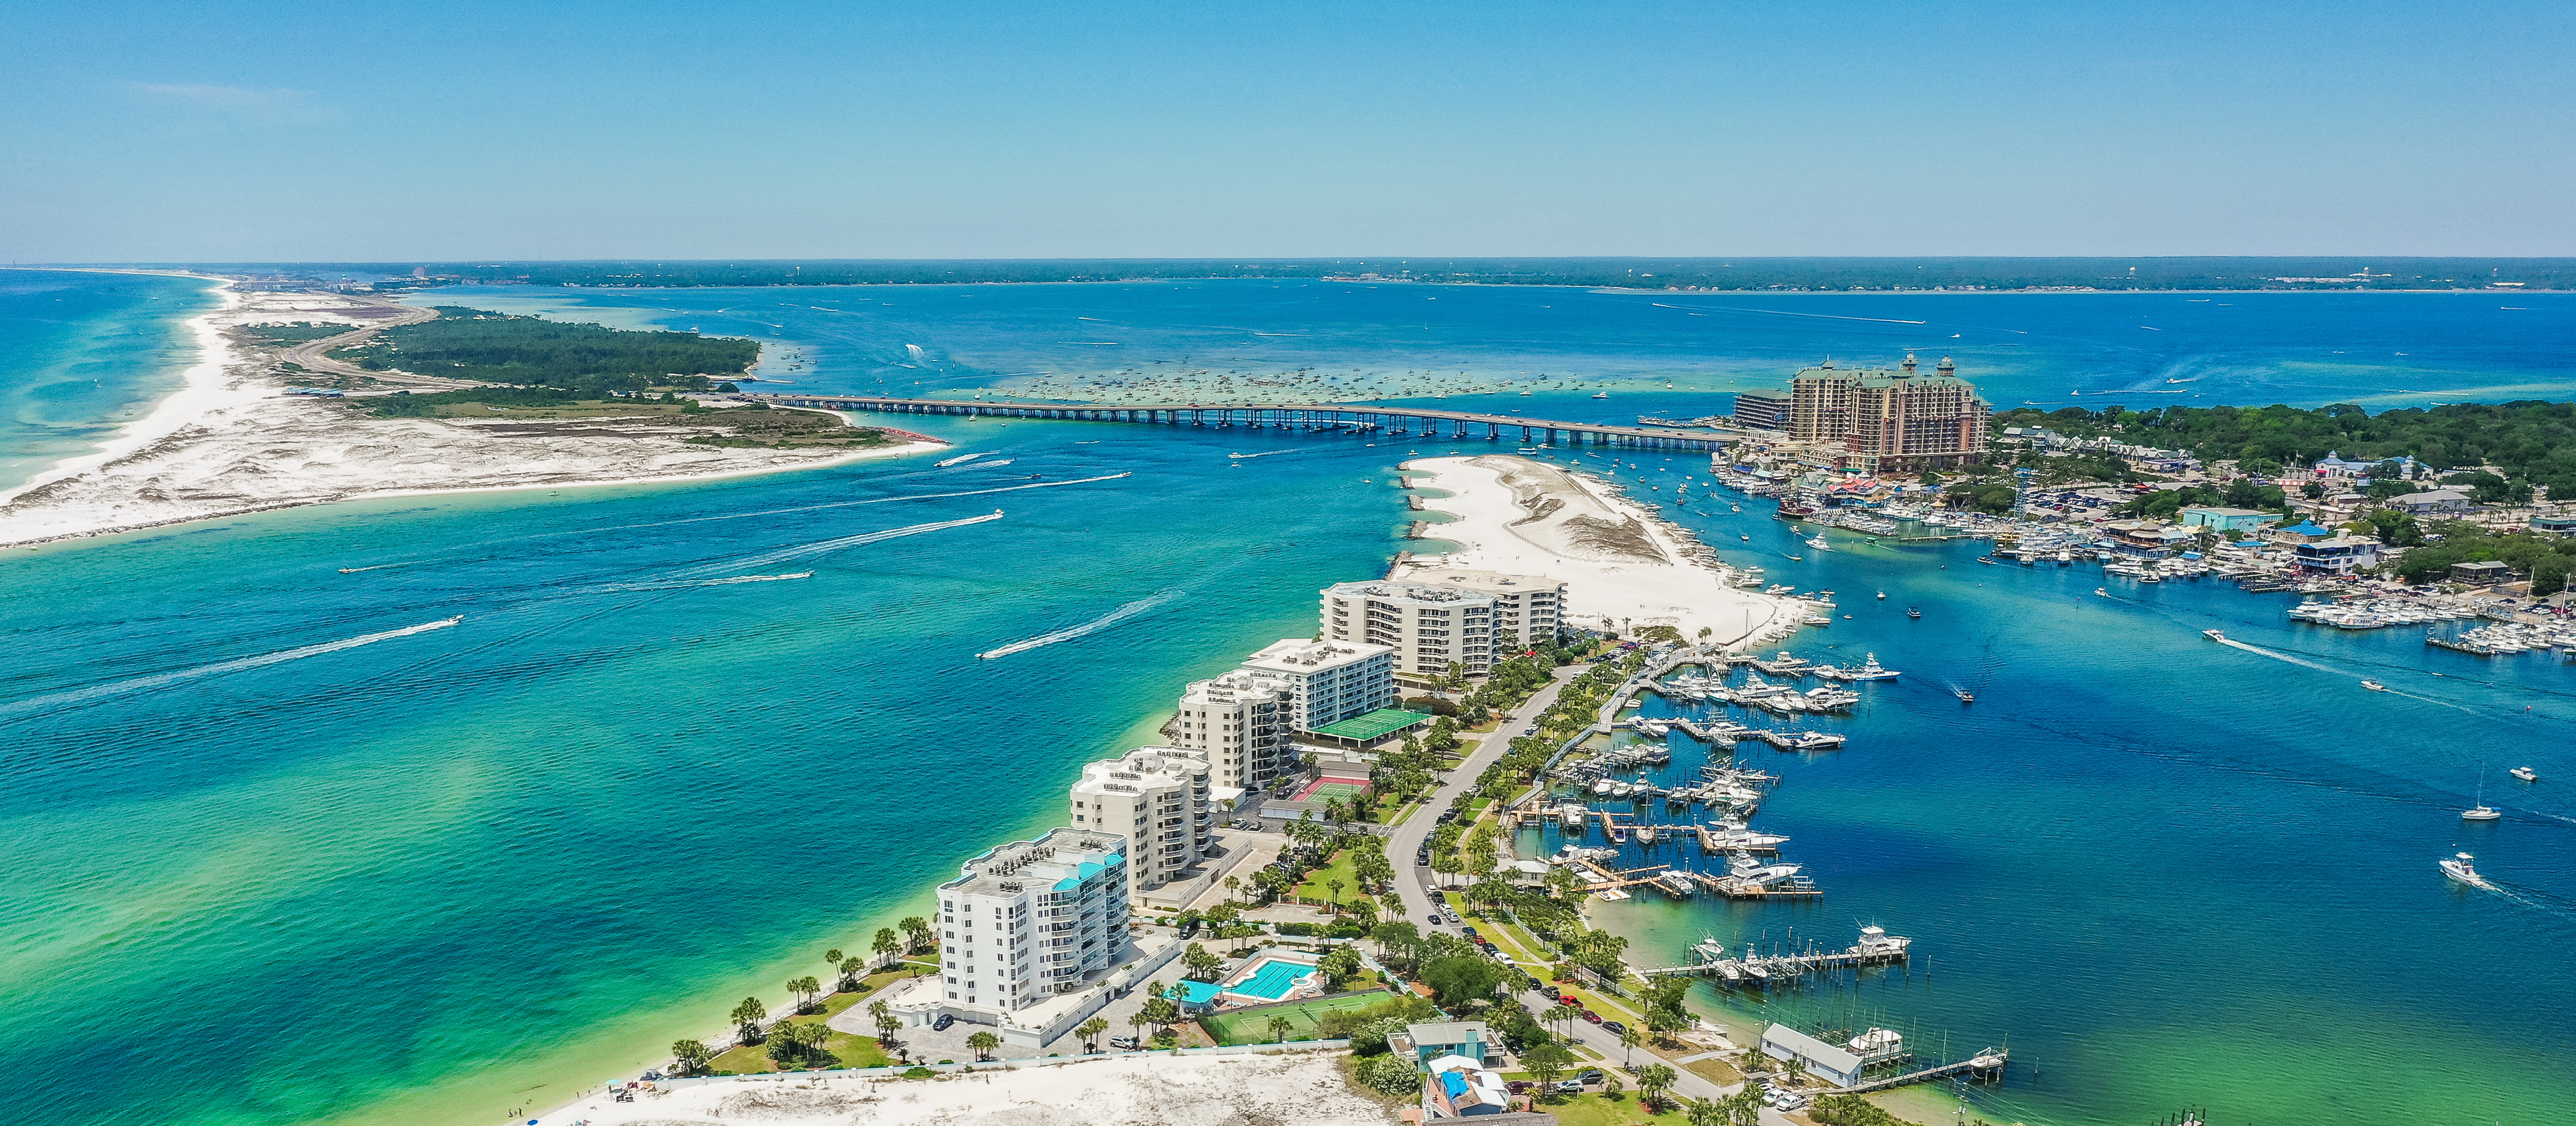 An aerial view of Destin Harbor highlighting the blues and greens of the Gulf